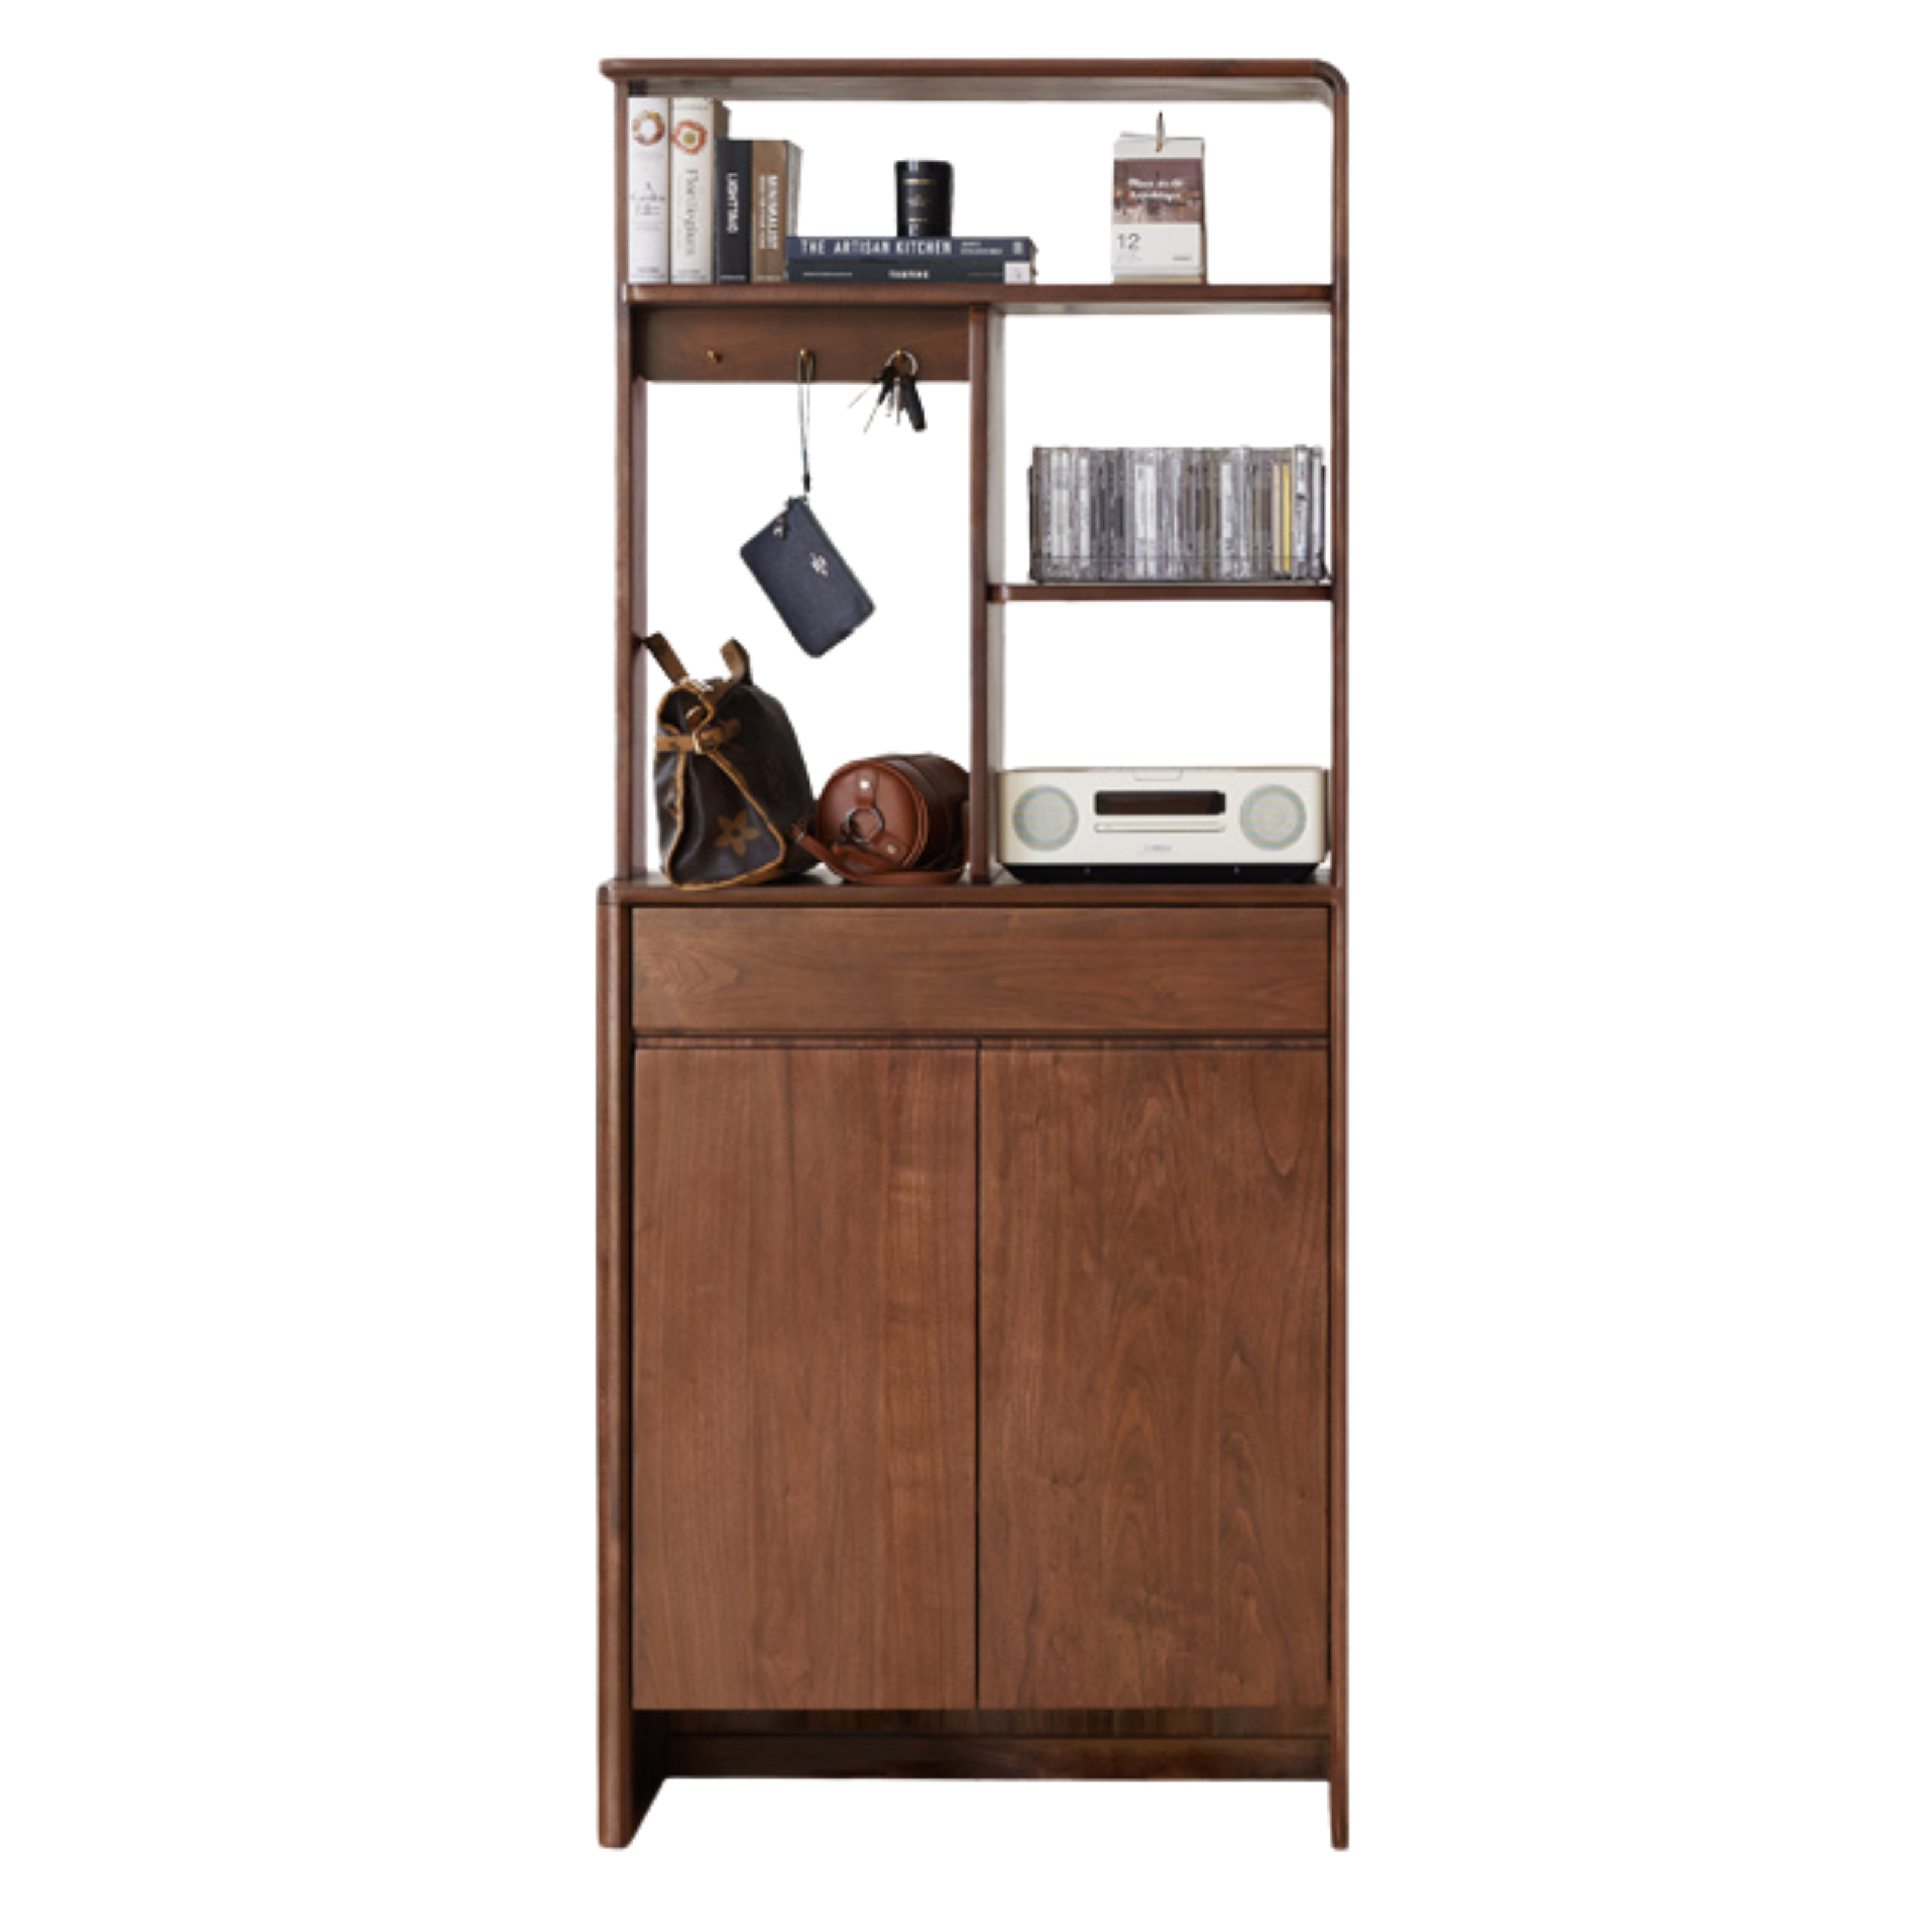 Black walnut solid wood entrance cabinet, integrated partition screen cabinet